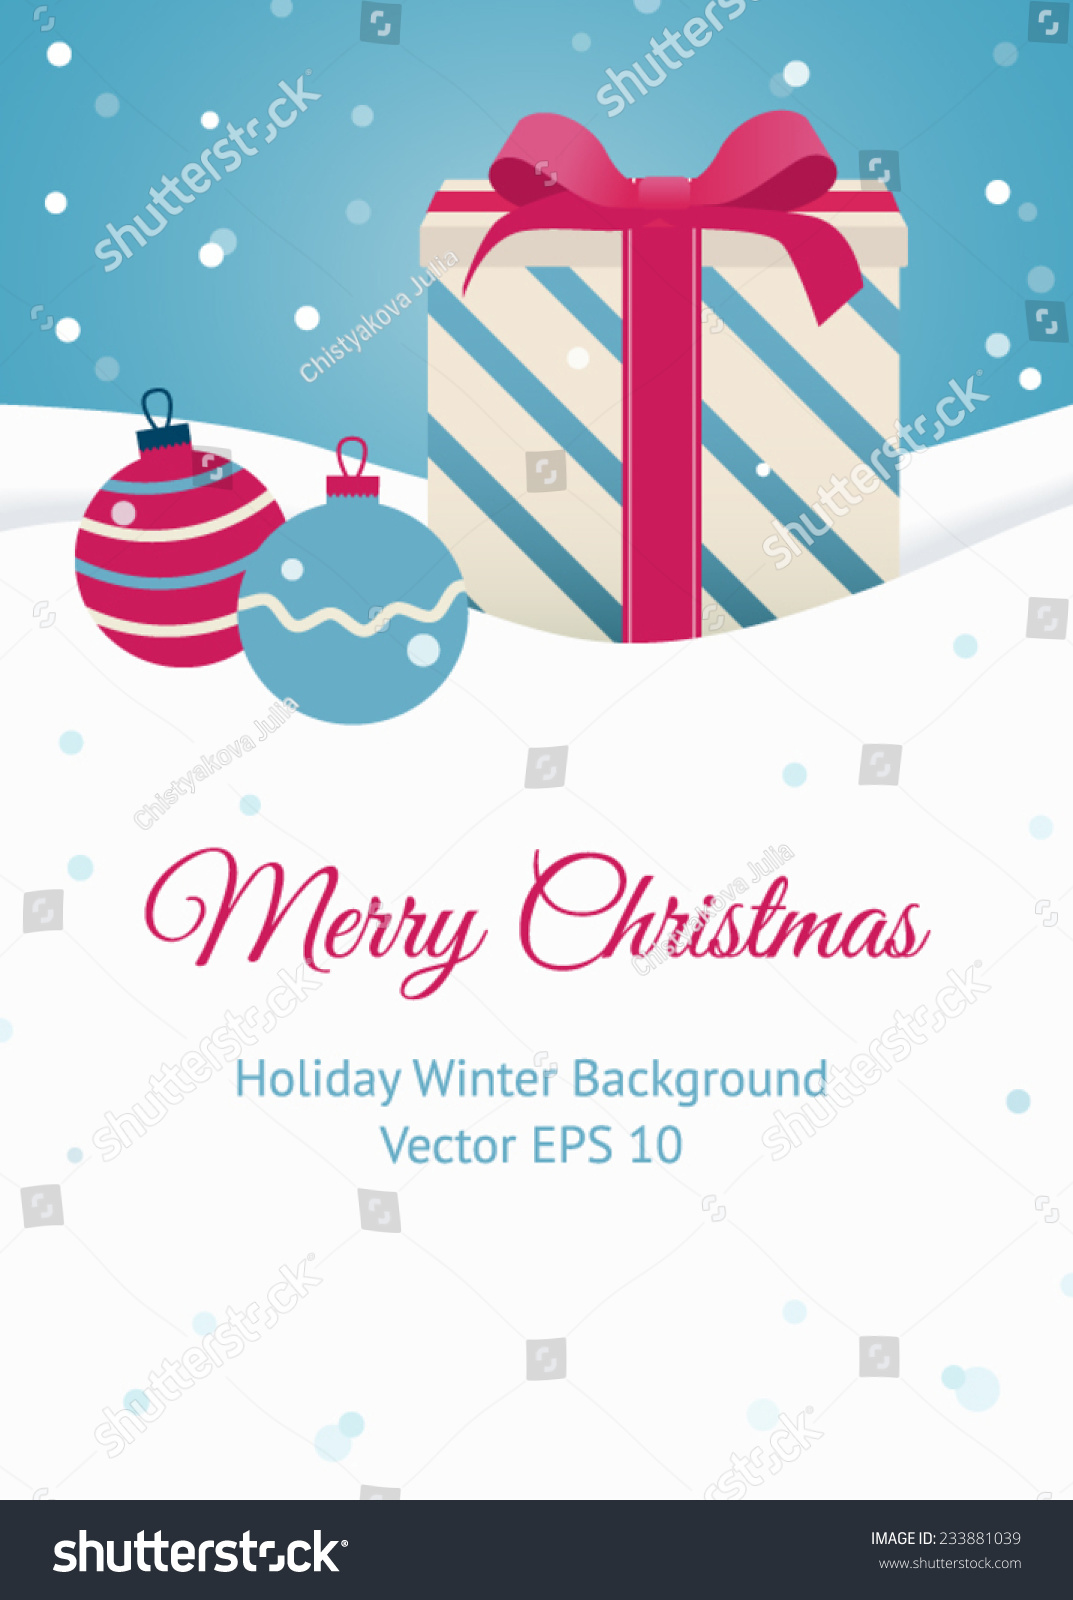 Merry Christmas Card. Holiday Background Stock Vector Illustration 233881039 : Shutterstock